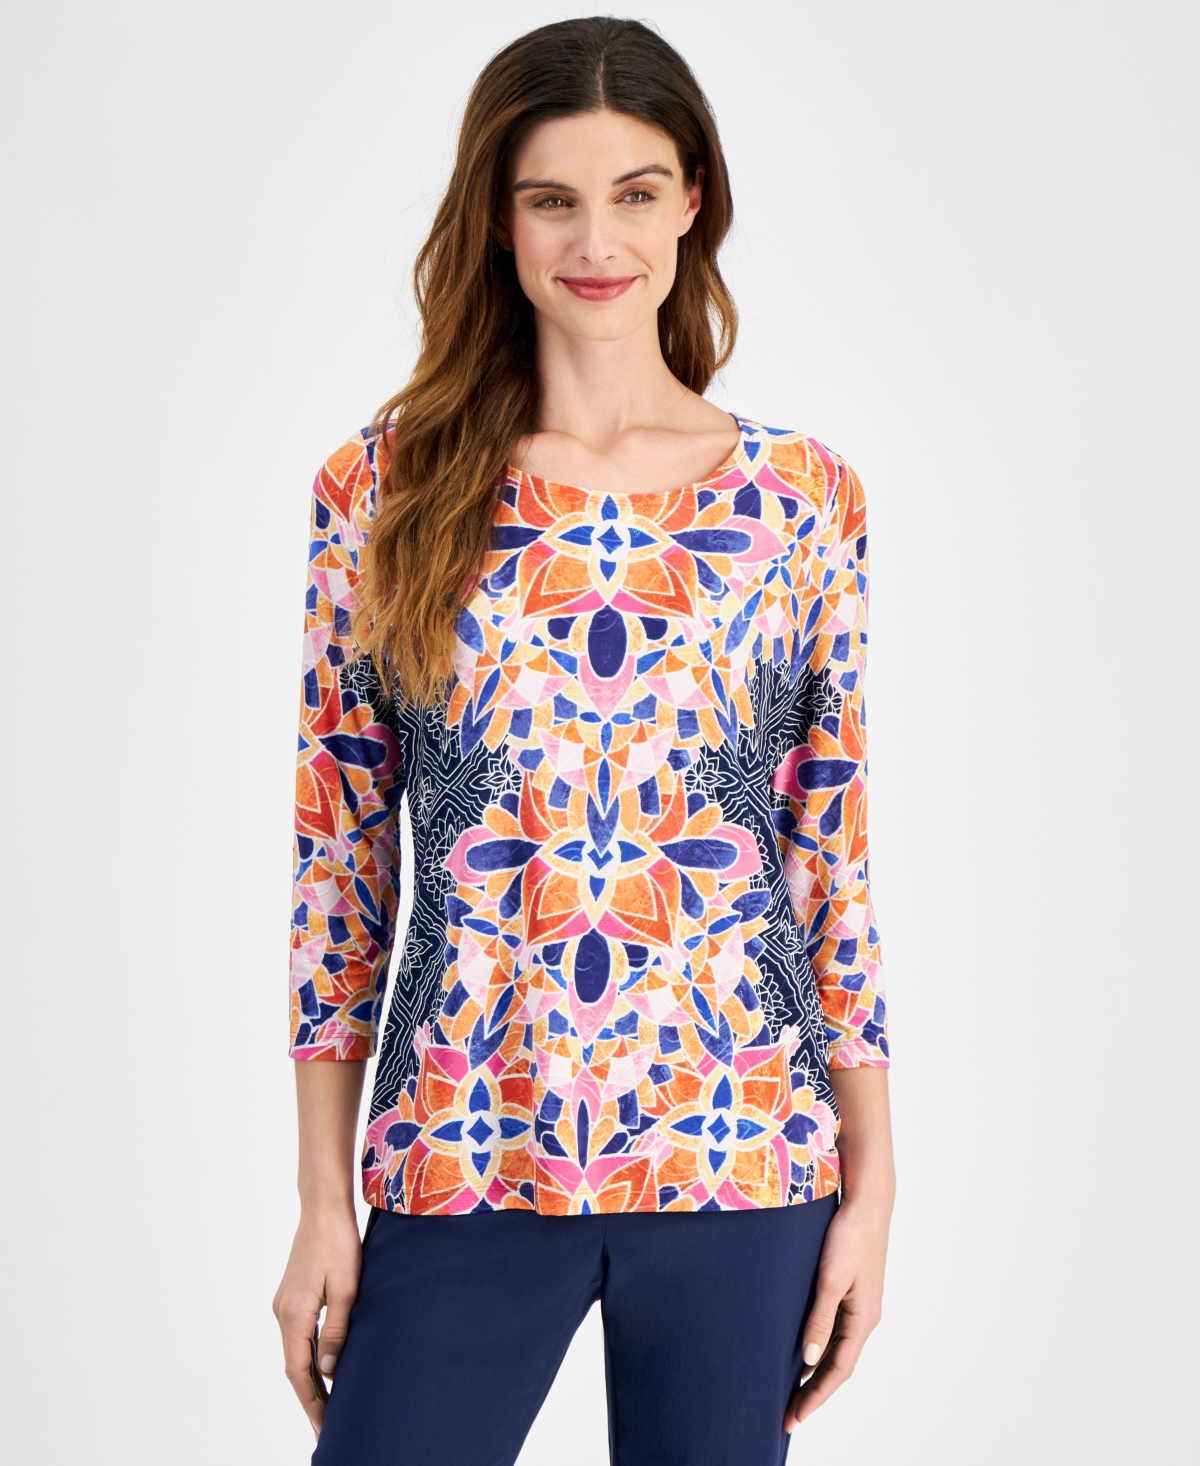 Petite Glamorous Glass Jacquard Printed 3/4-Sleeve Top, Created for Macy's - Intrepid Blue Combo